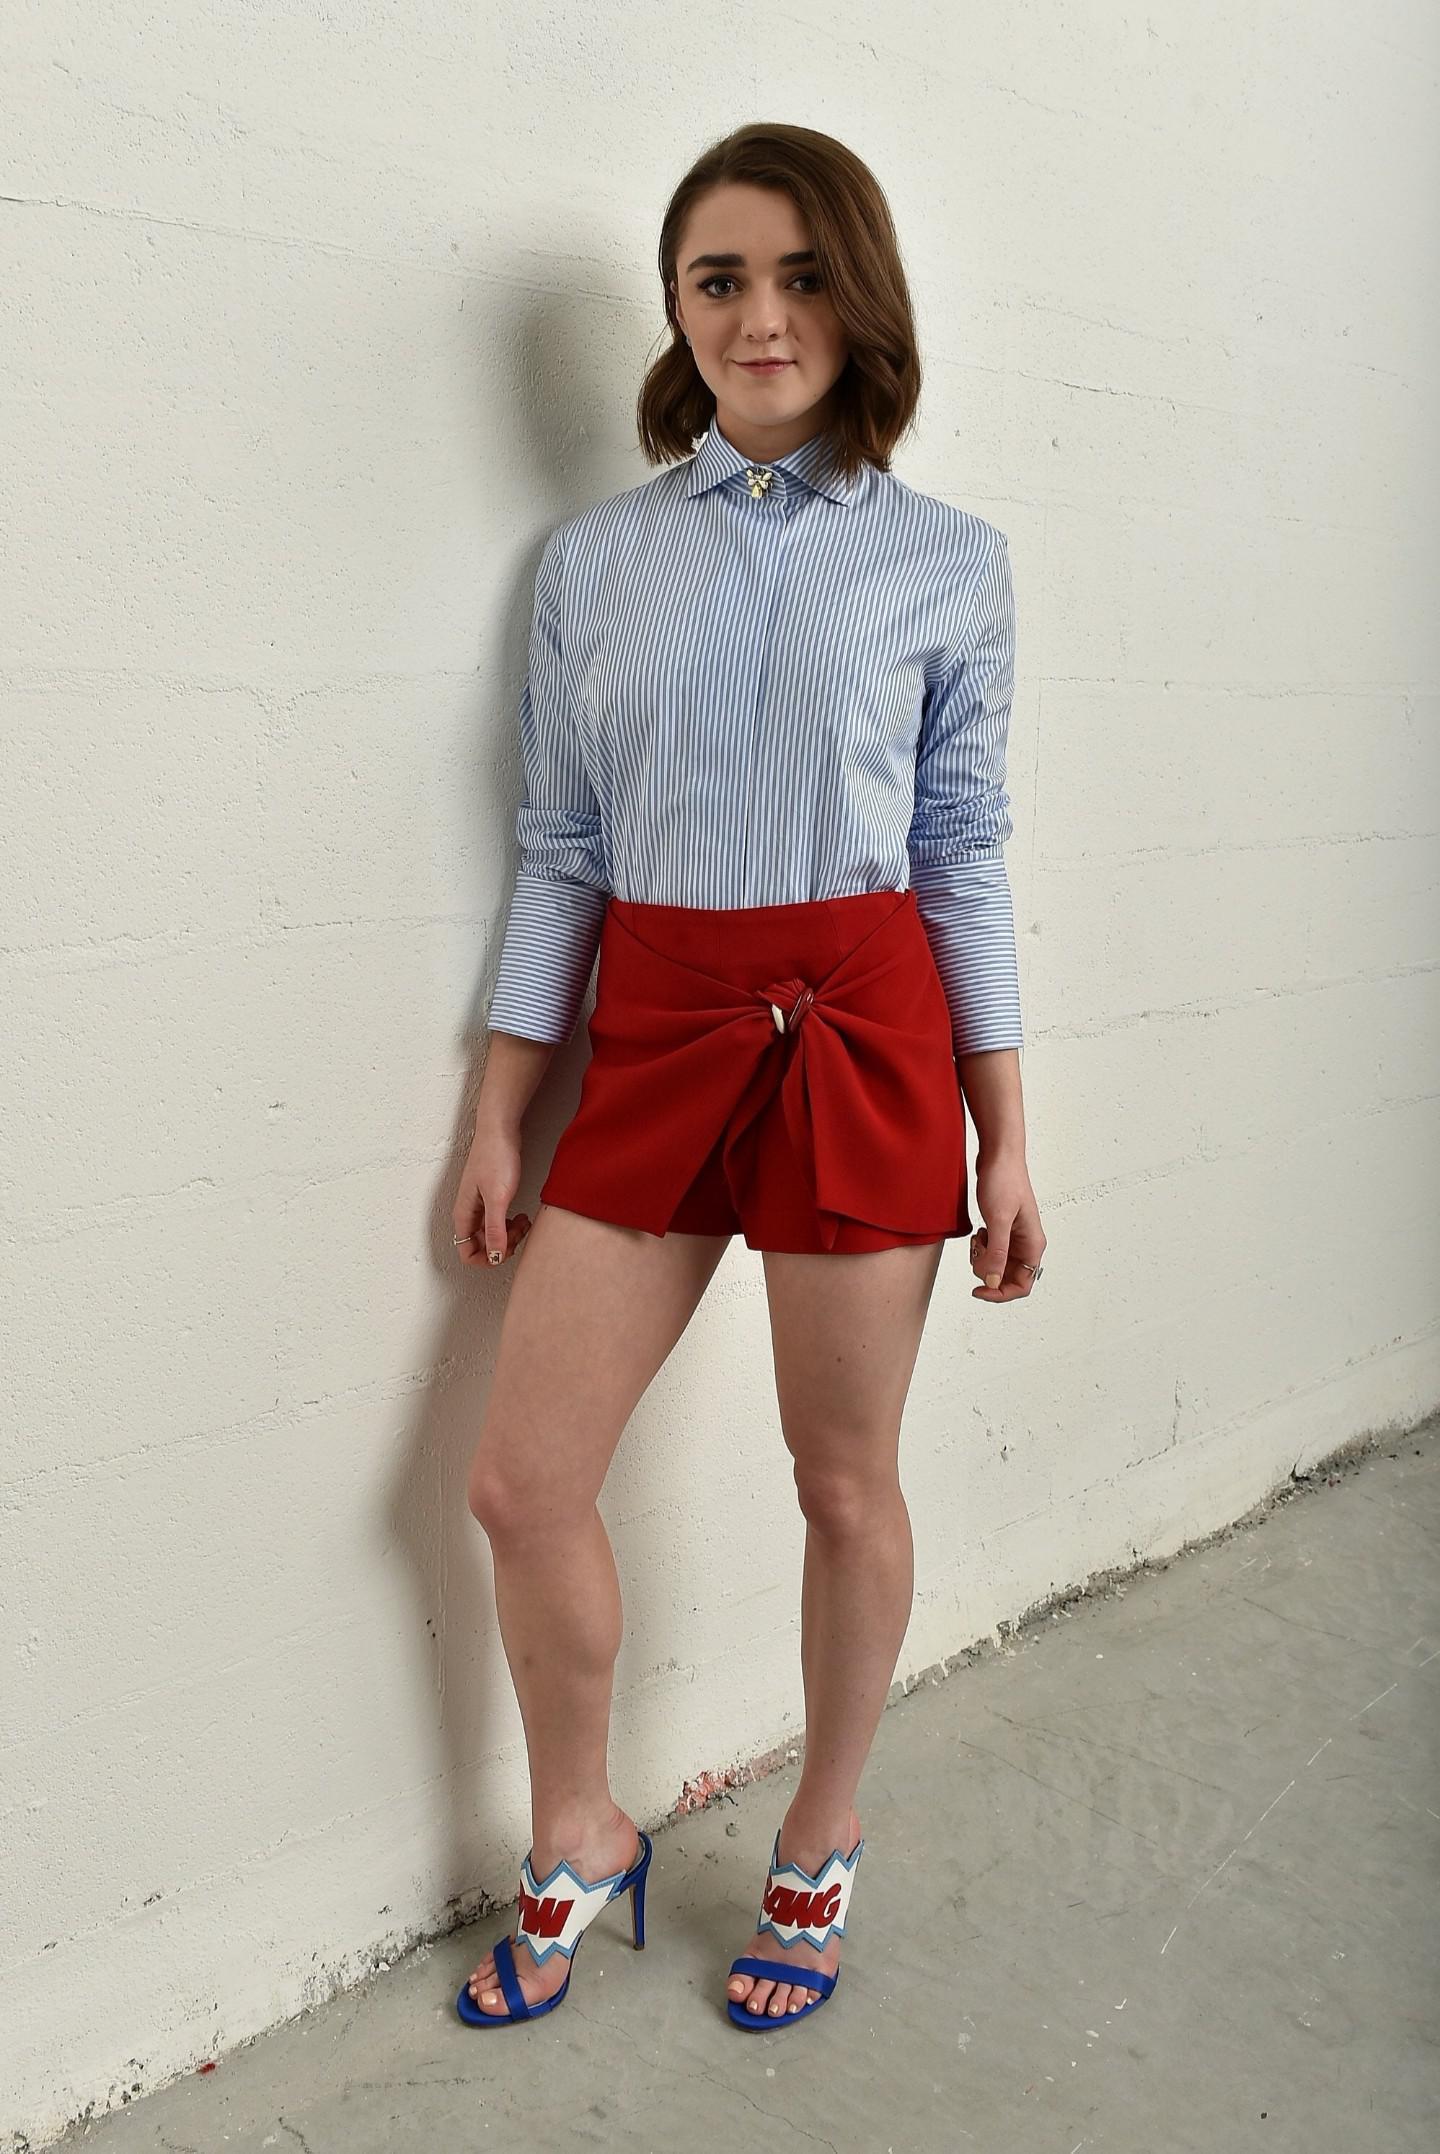 Maisie Williams Cute Little Toes Feet Toes Footfetis